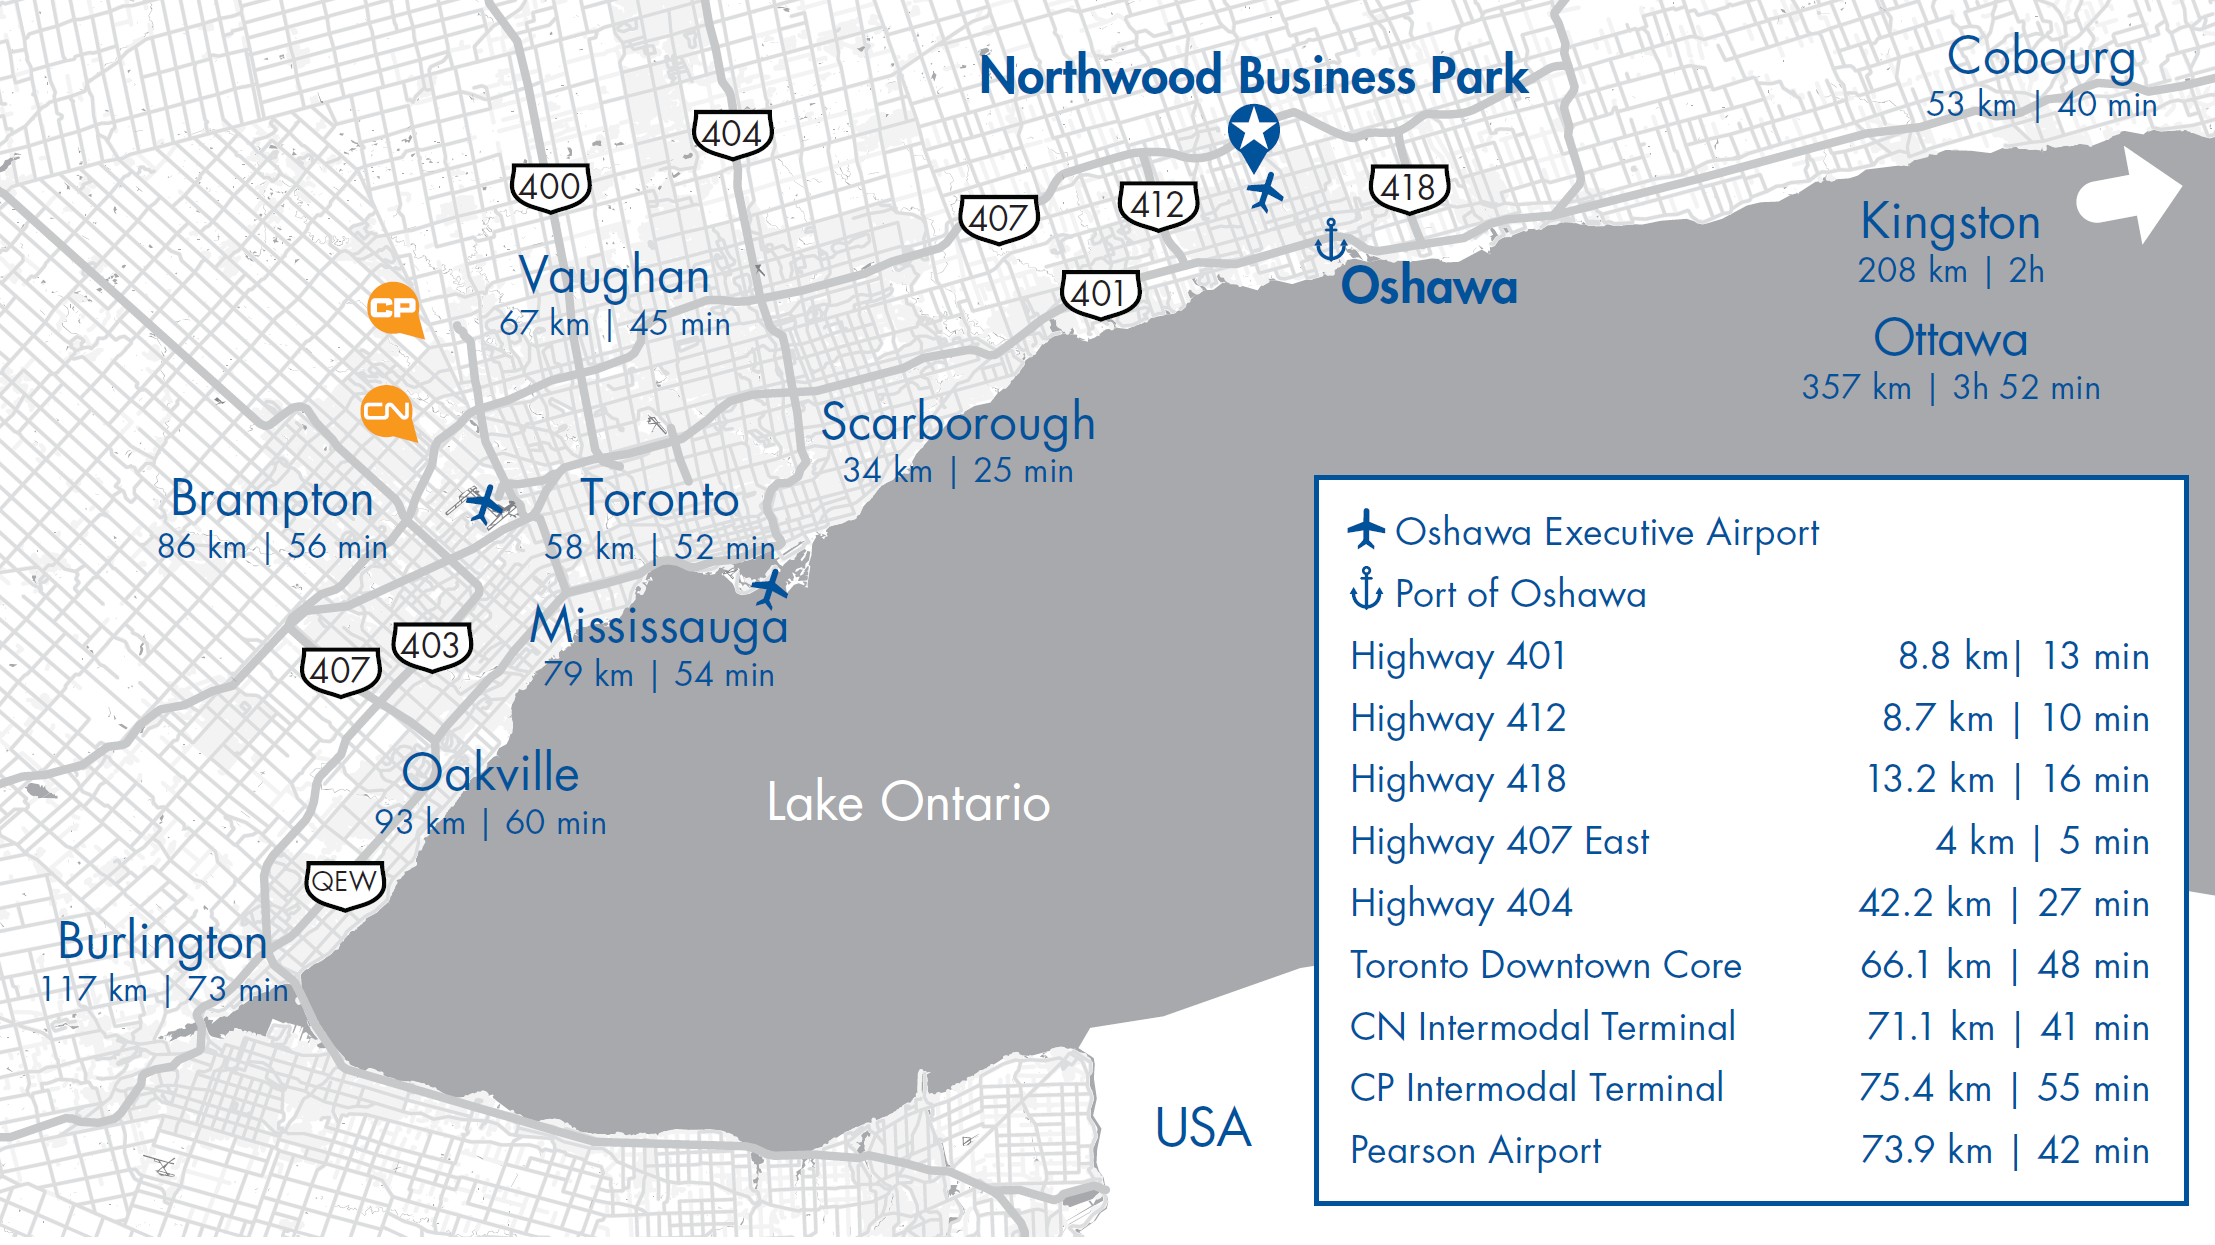 Map showing GTA proximity to Northwood Business Park, including airports, train stations, highways and other surroundings and proximity to the business park 